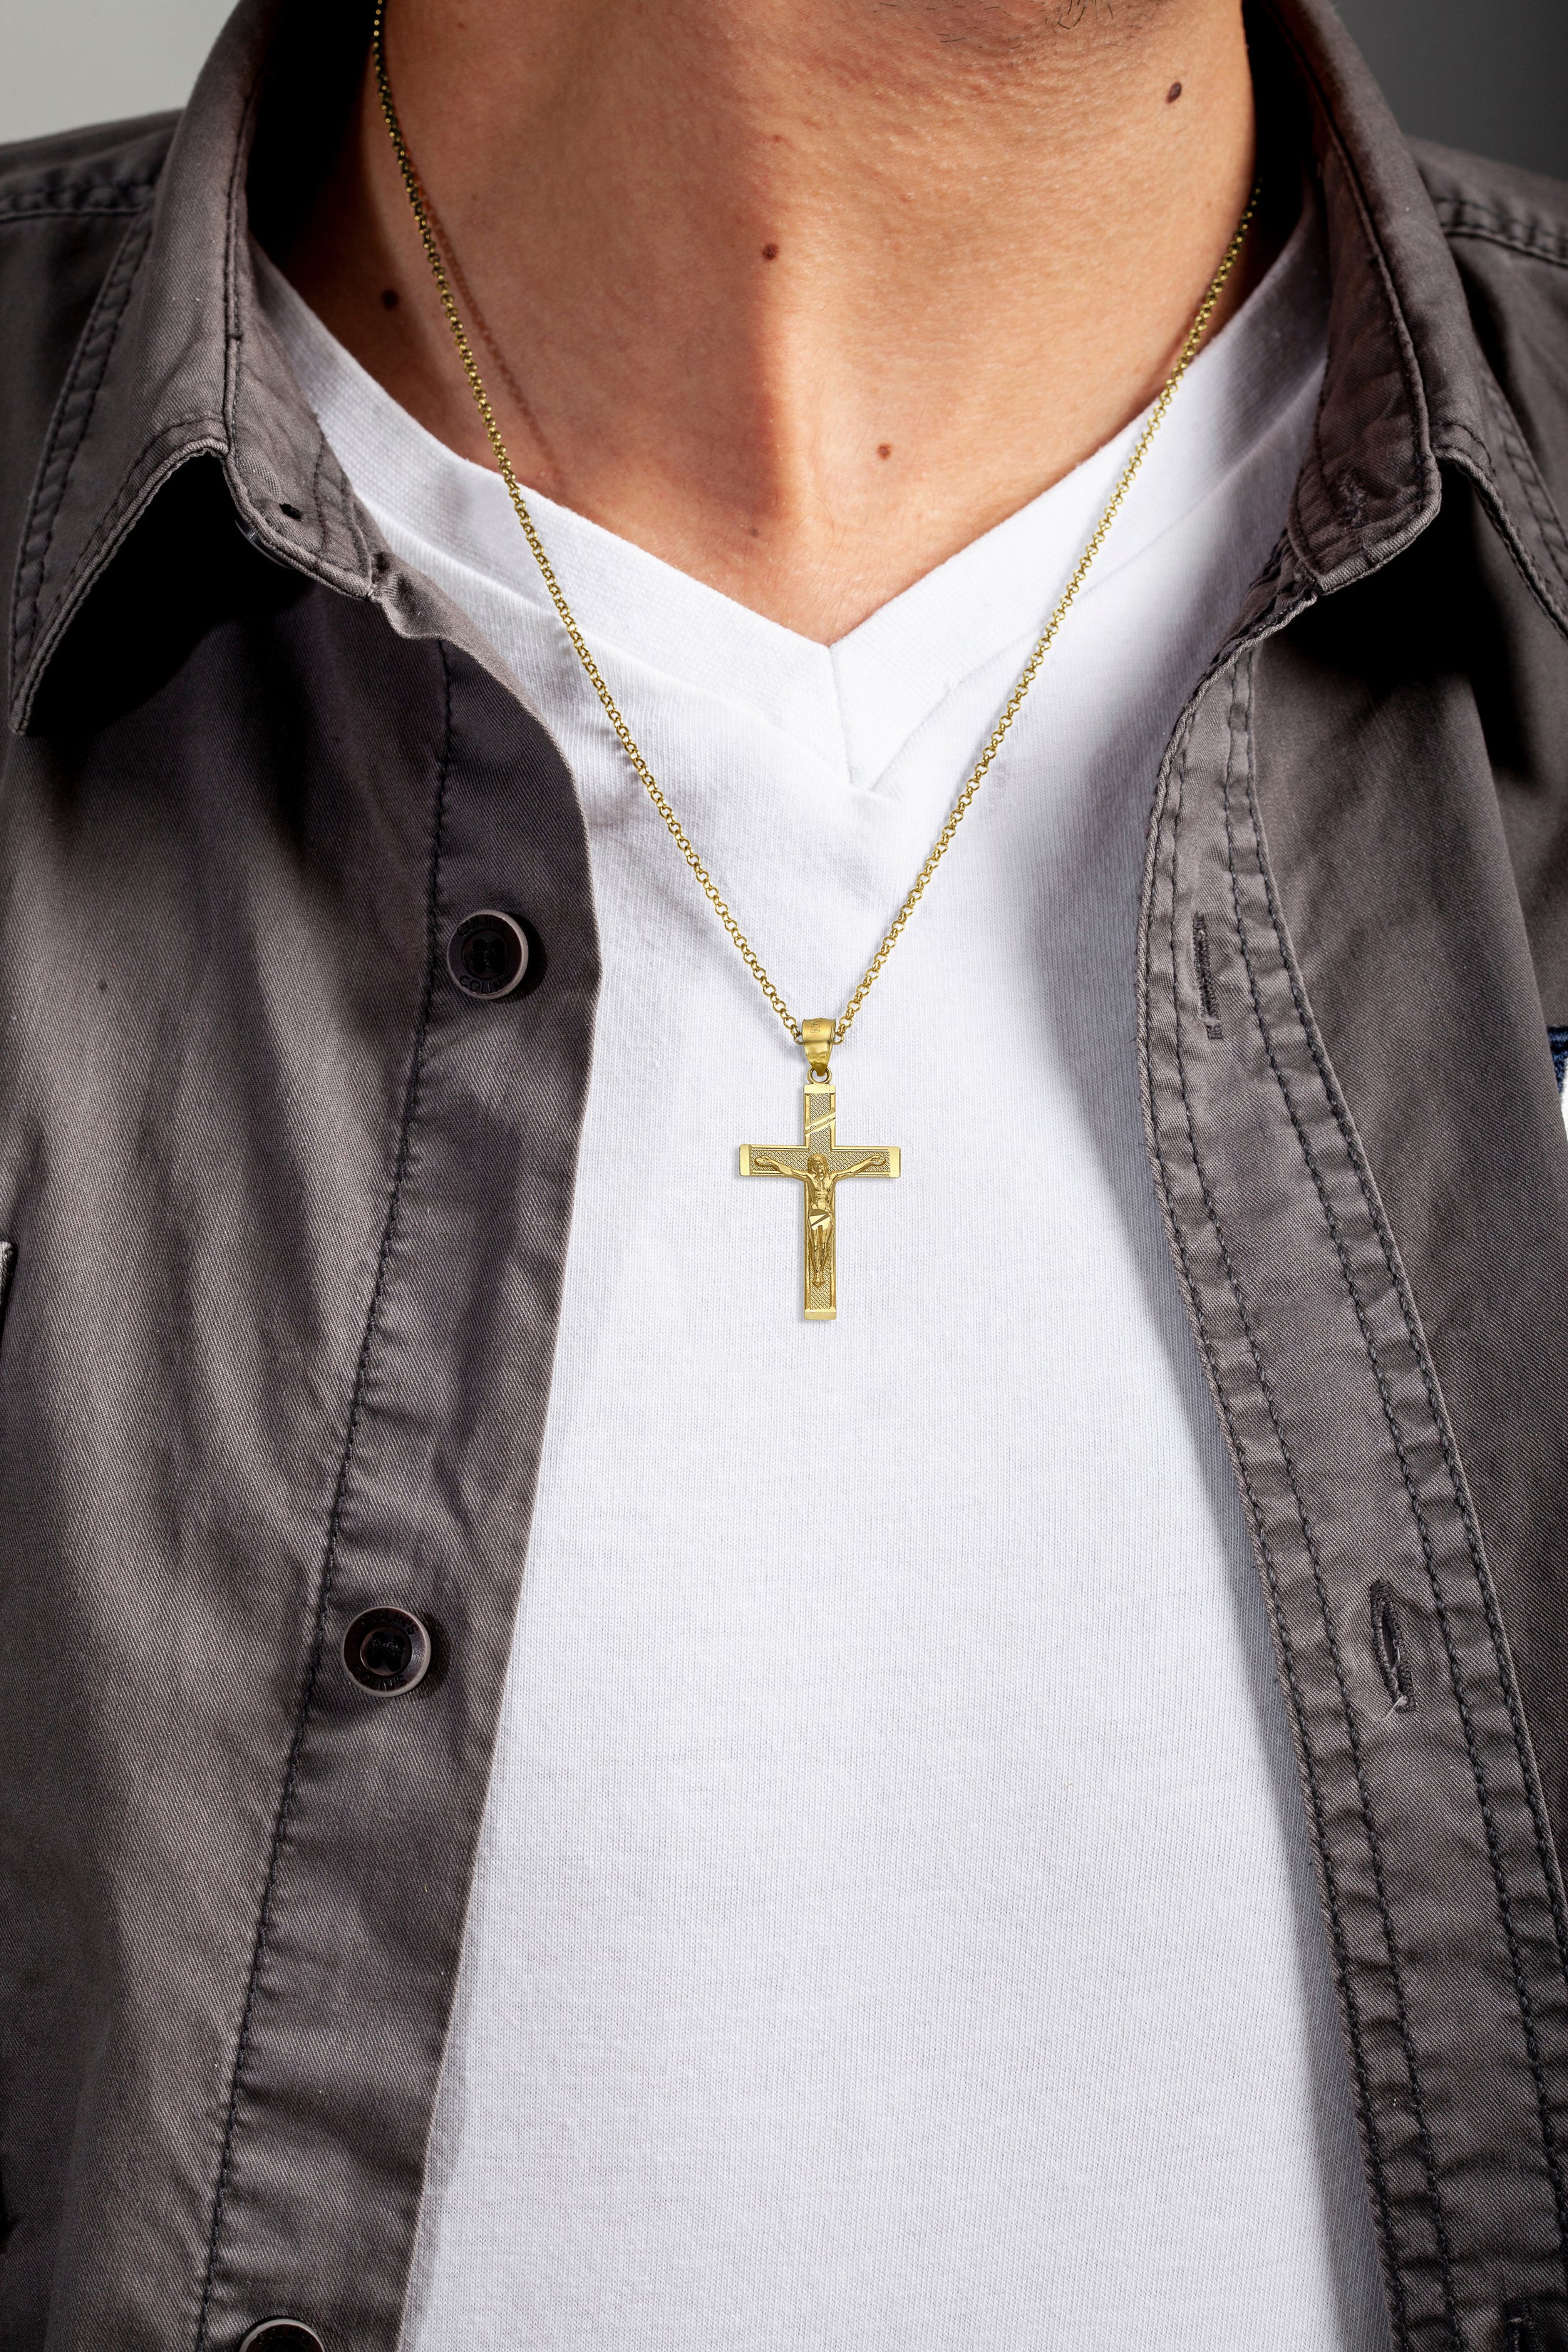 Solid Gold Crucifix Pendant - 10k or 14k